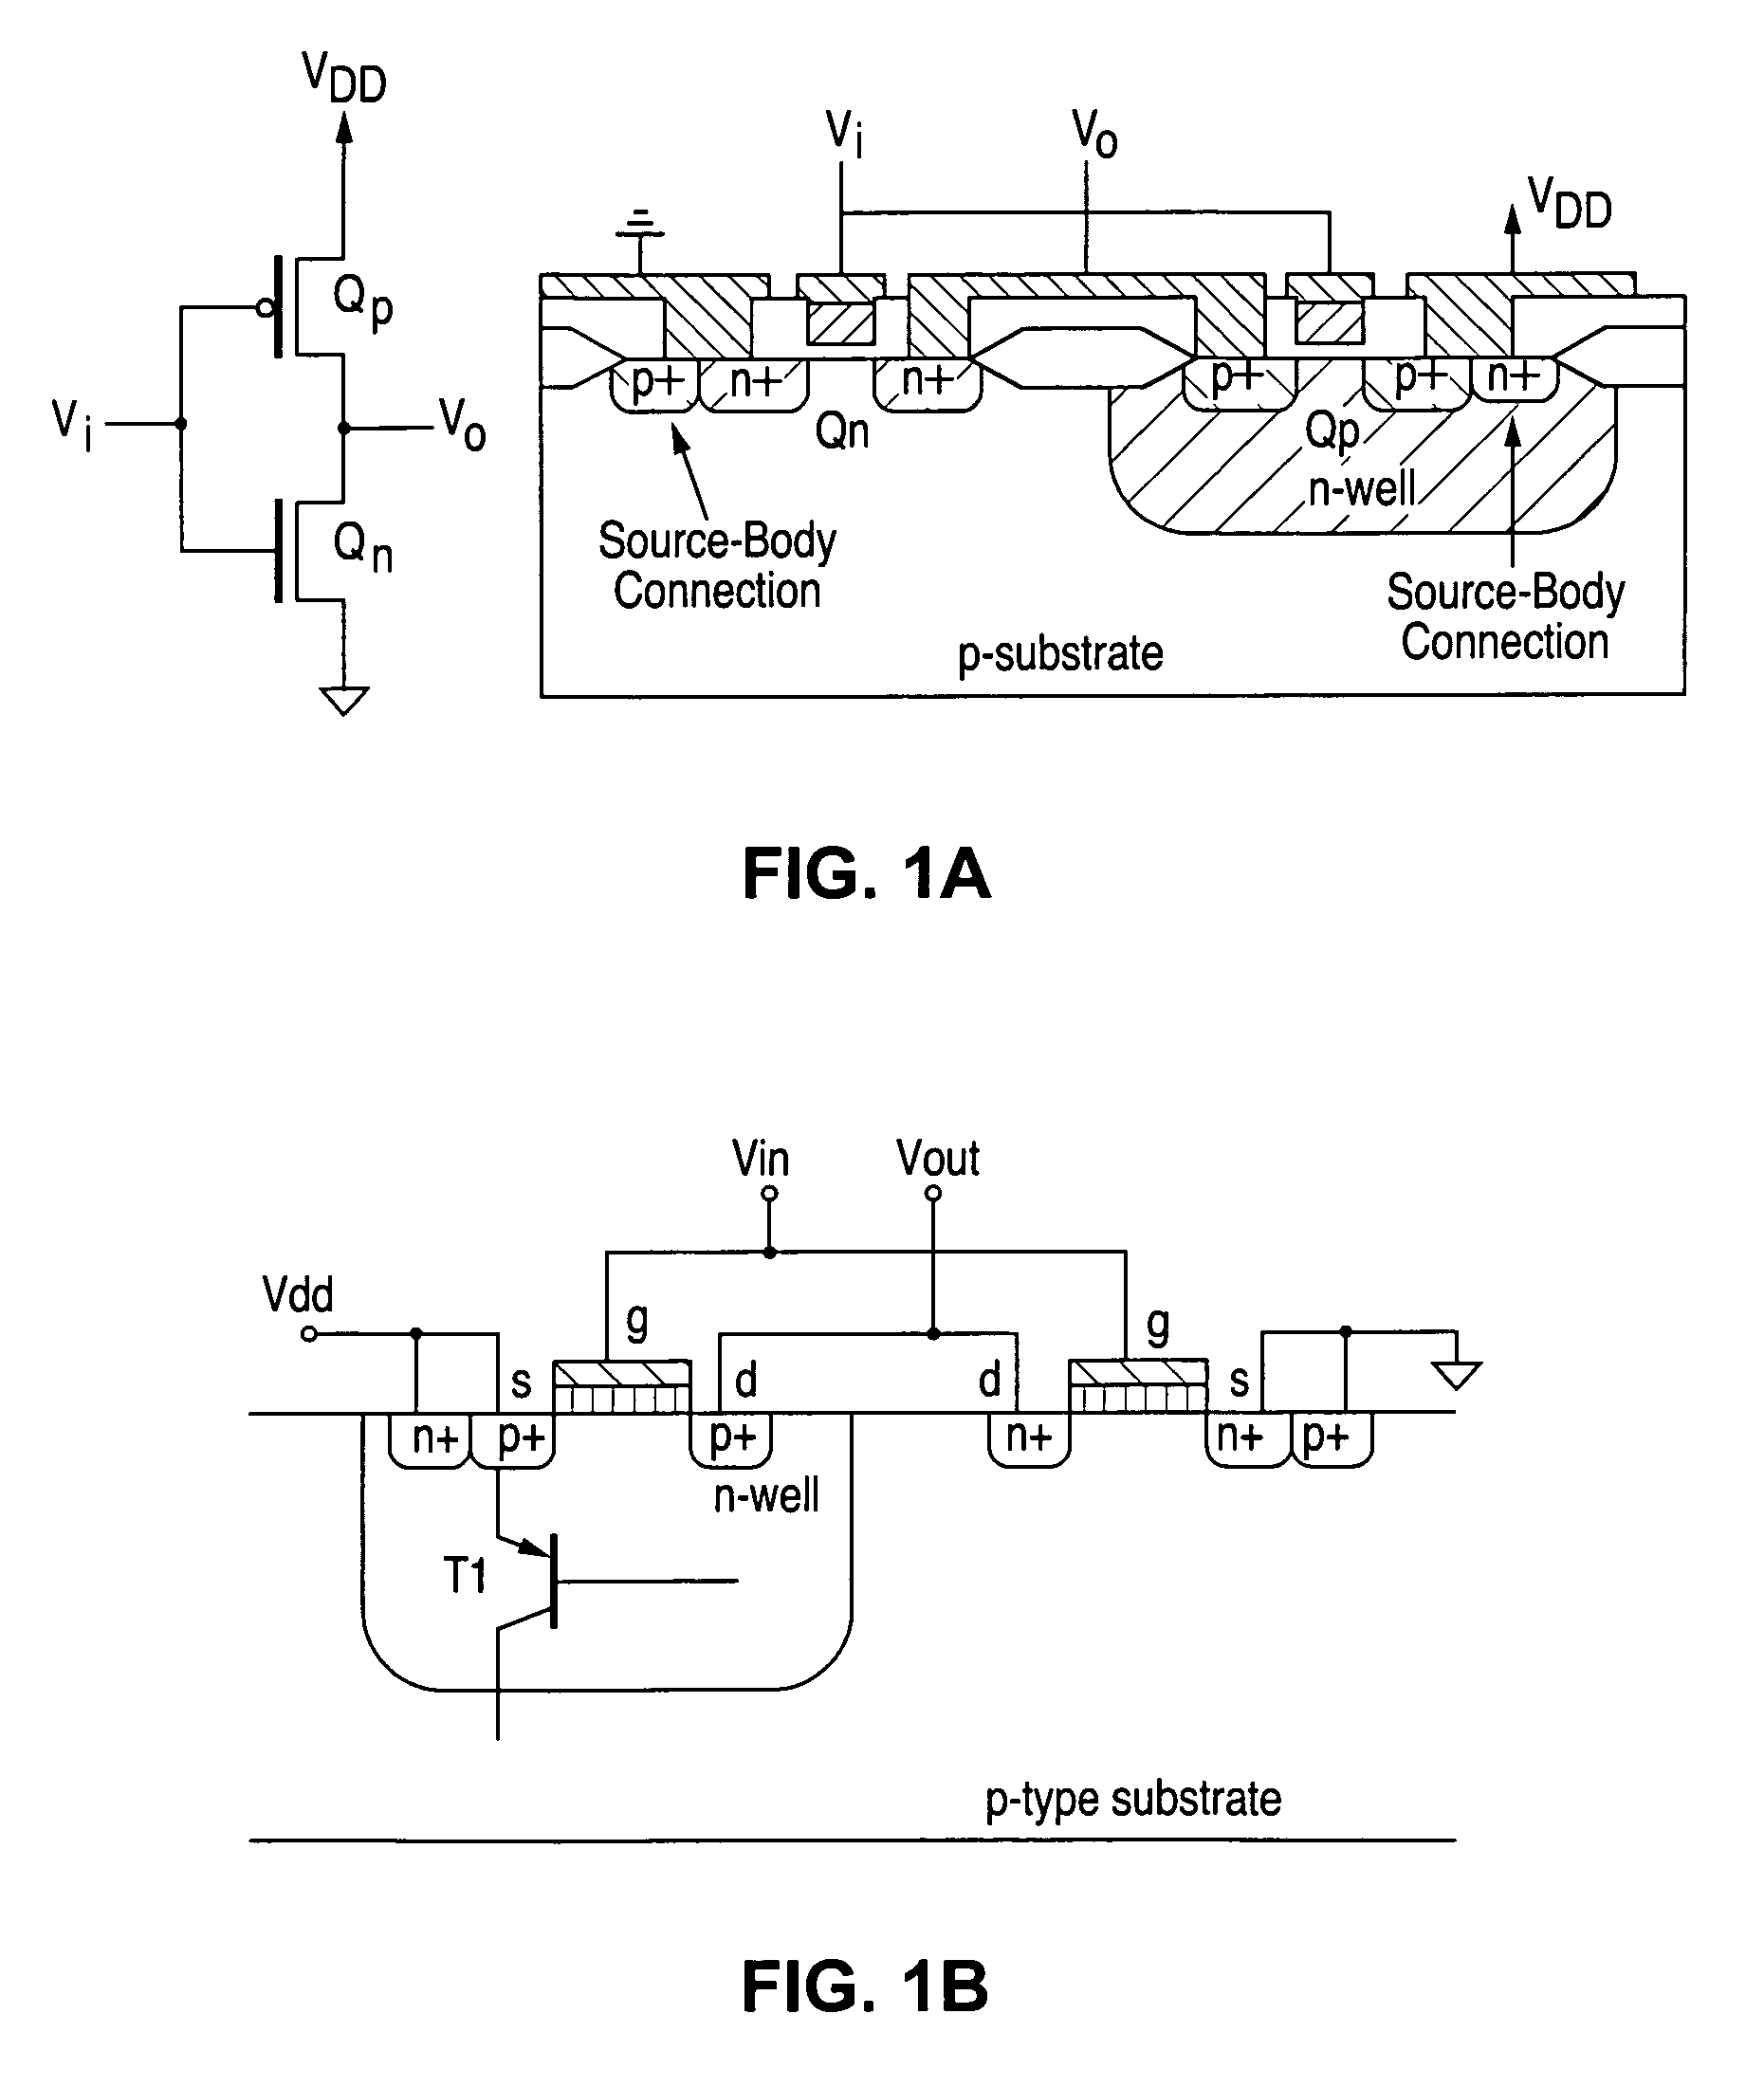 Metal oxide semiconductor (MOS) bandgap voltage reference circuit